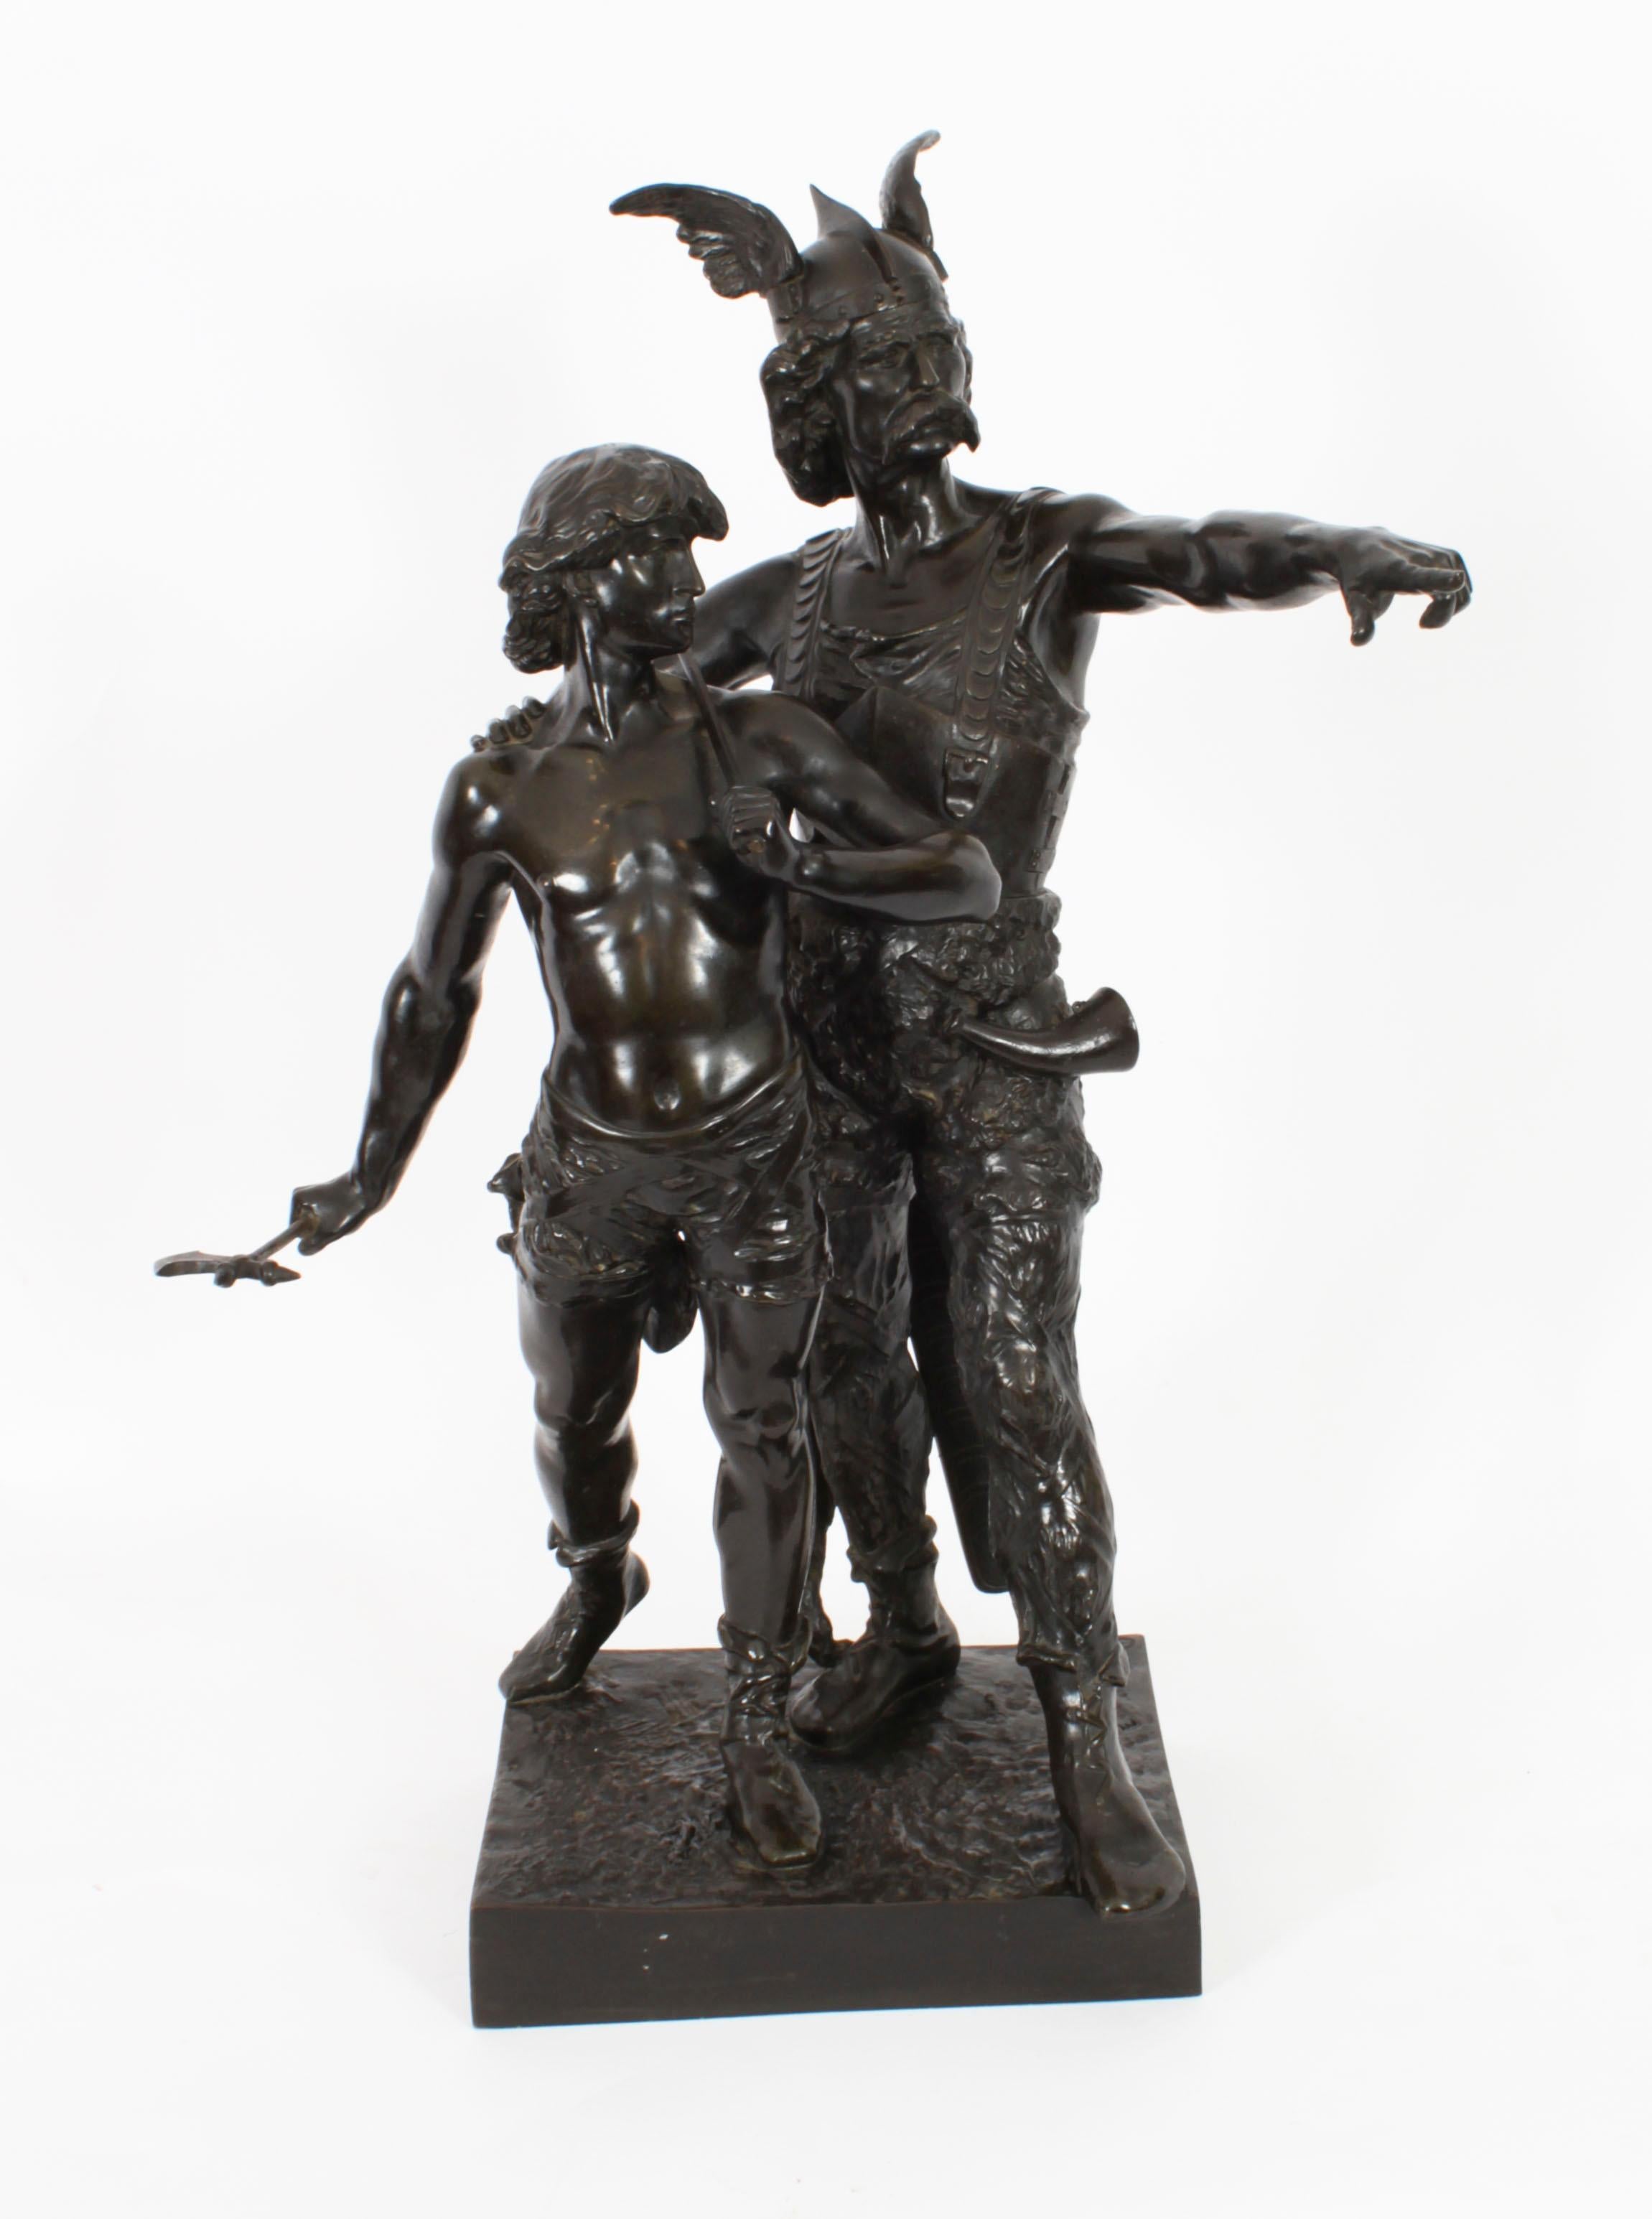 This is a large French bronze sculpture of Vercingetorix with his son by Emile Laporte (1858 - 1901), circa 1890 in date.

The standing figure of Vercingetorix wearing a winged helmet, with arm raised pointing into the distance, a figure of a of